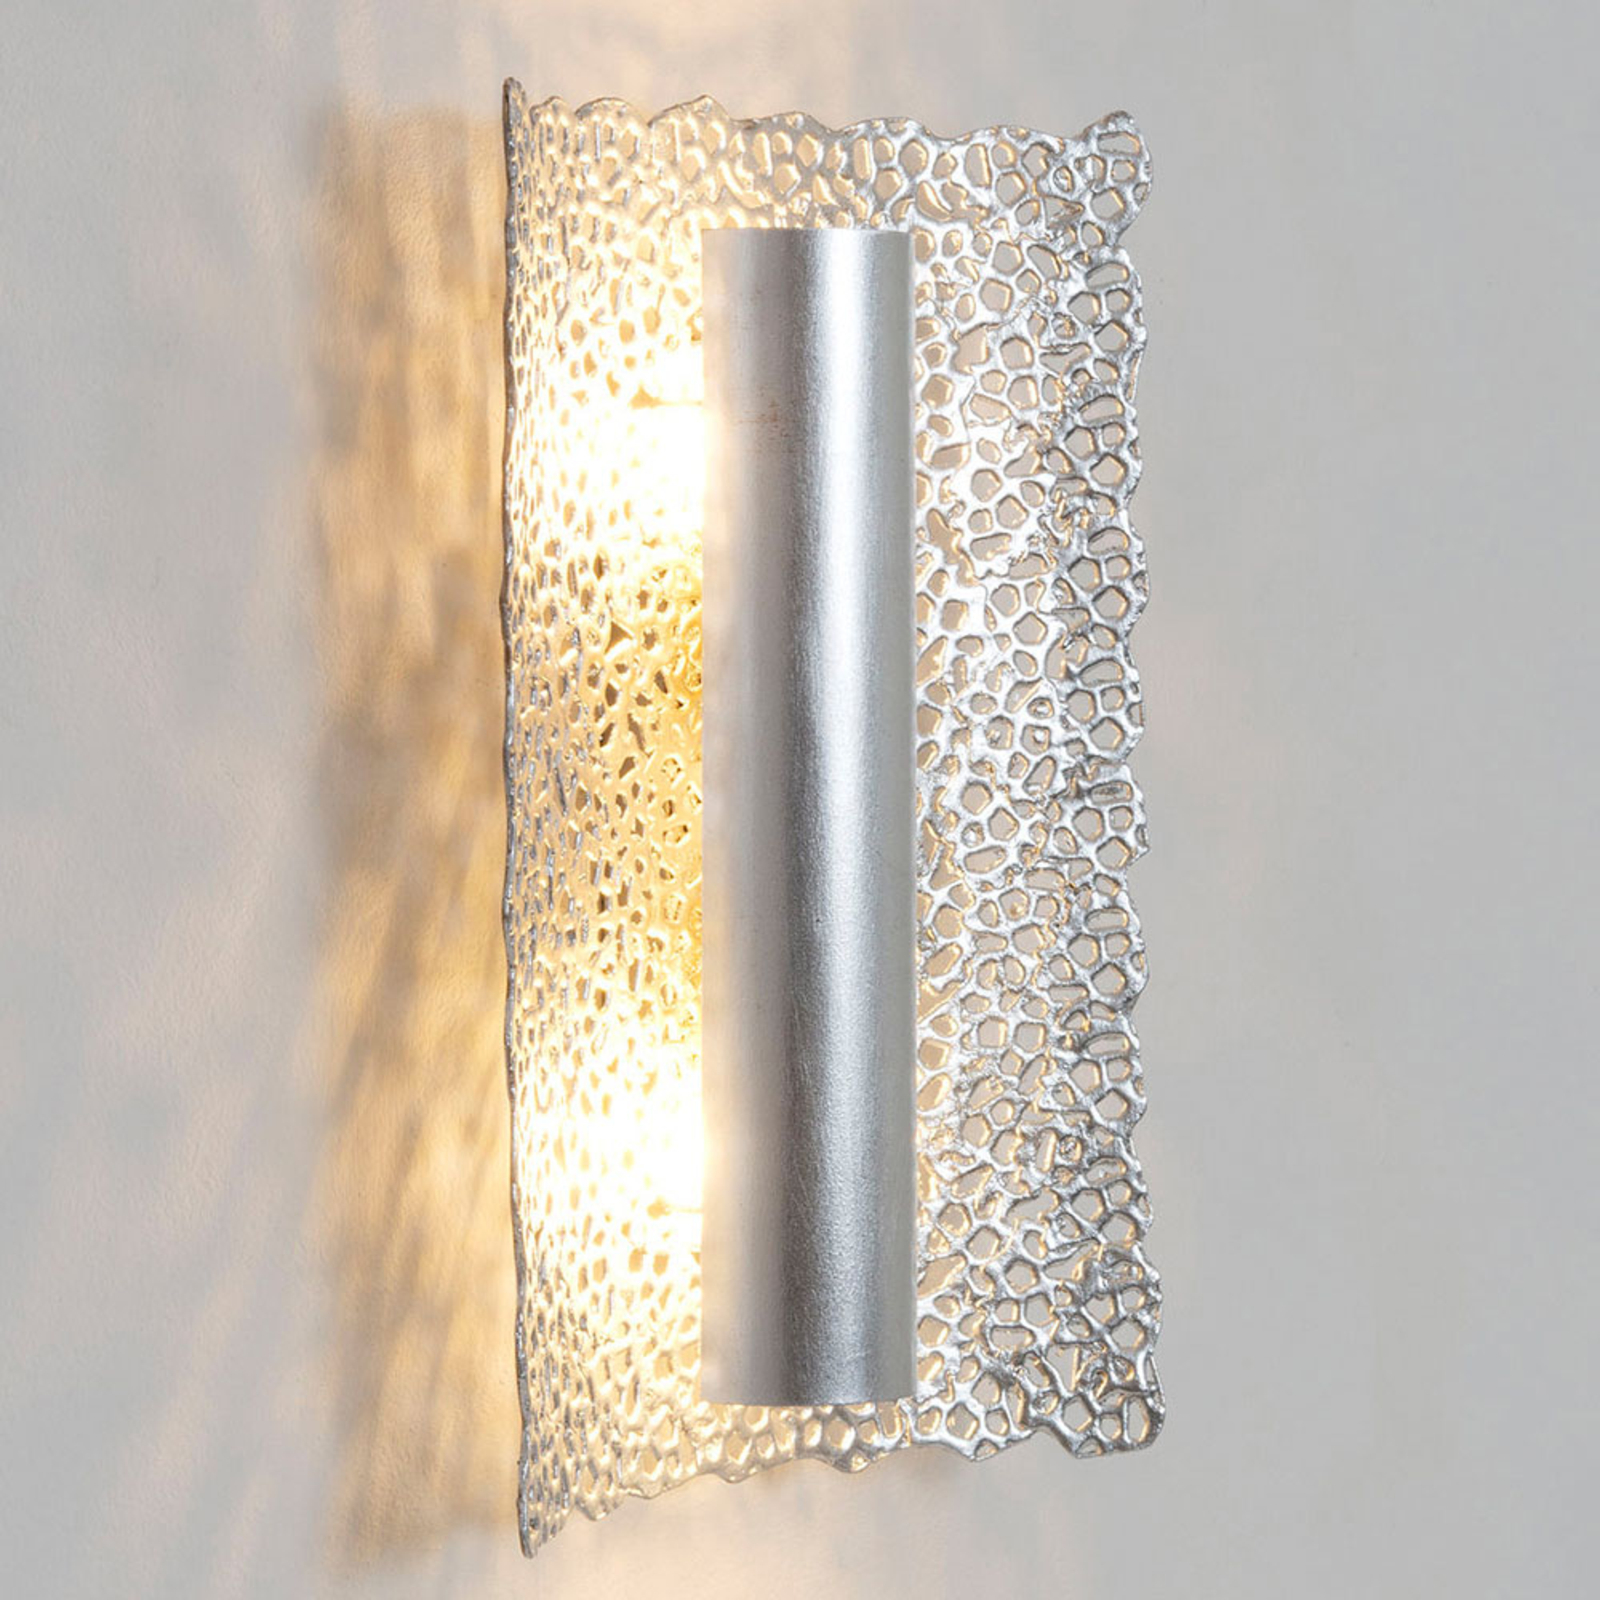 Utopistico wall light in silver and chrome